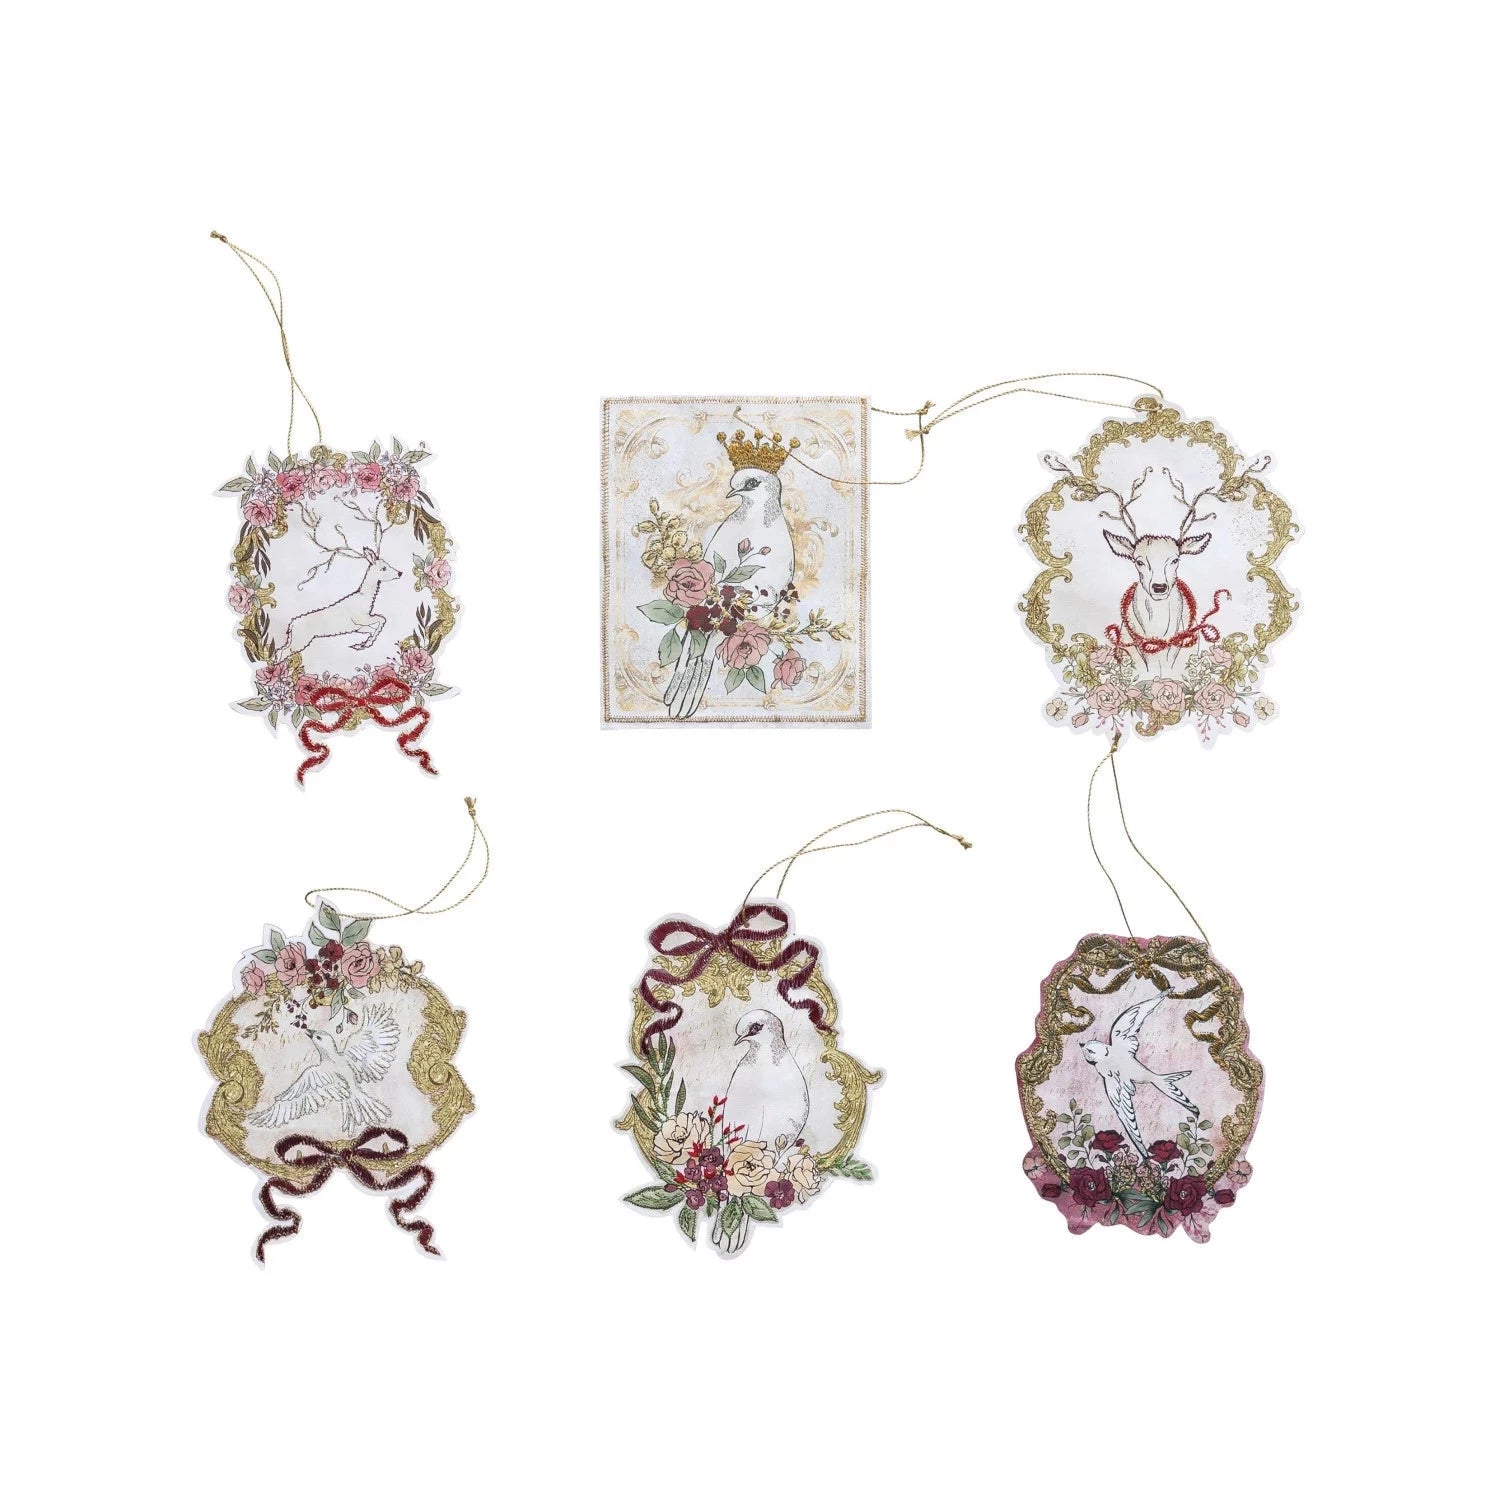 Paper Ornaments With Embroidery